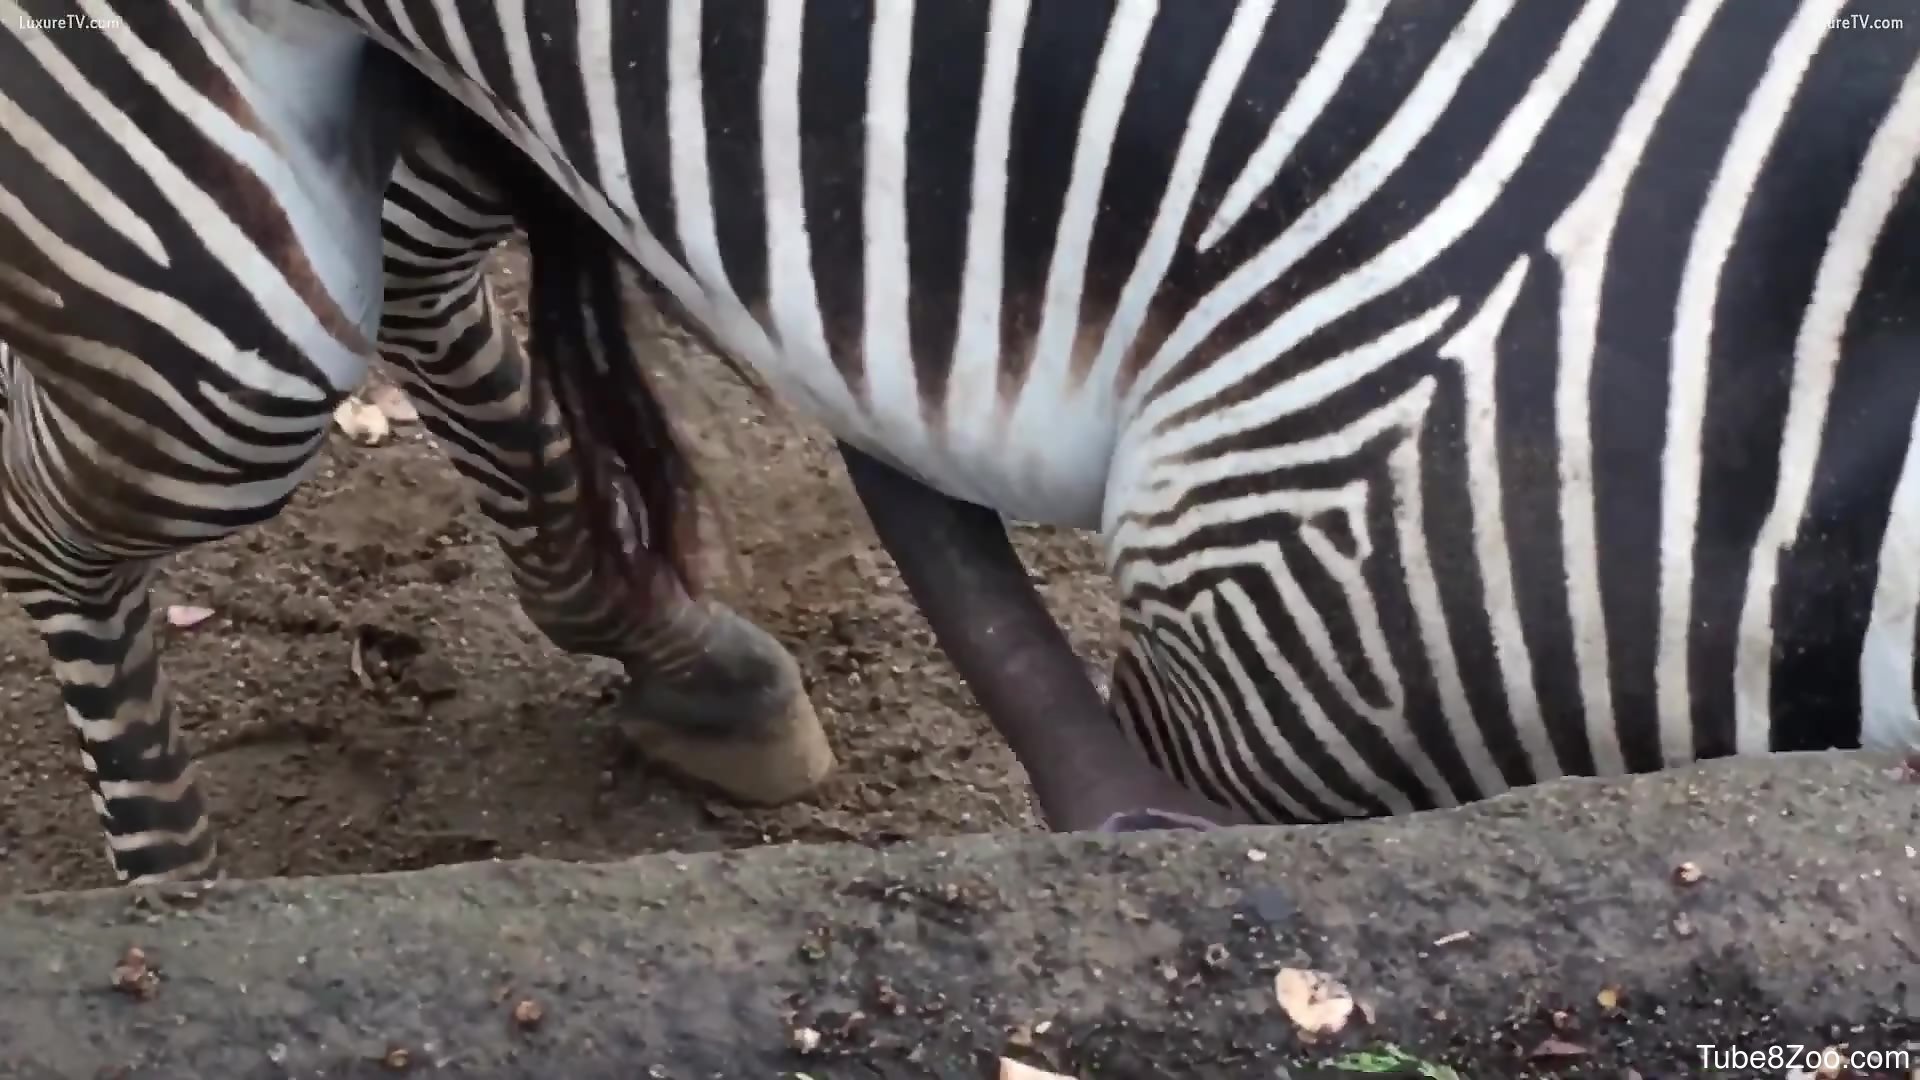 Sexy Video Hot Hot Zebra - Zebra cock continues to grow in a hot porno here